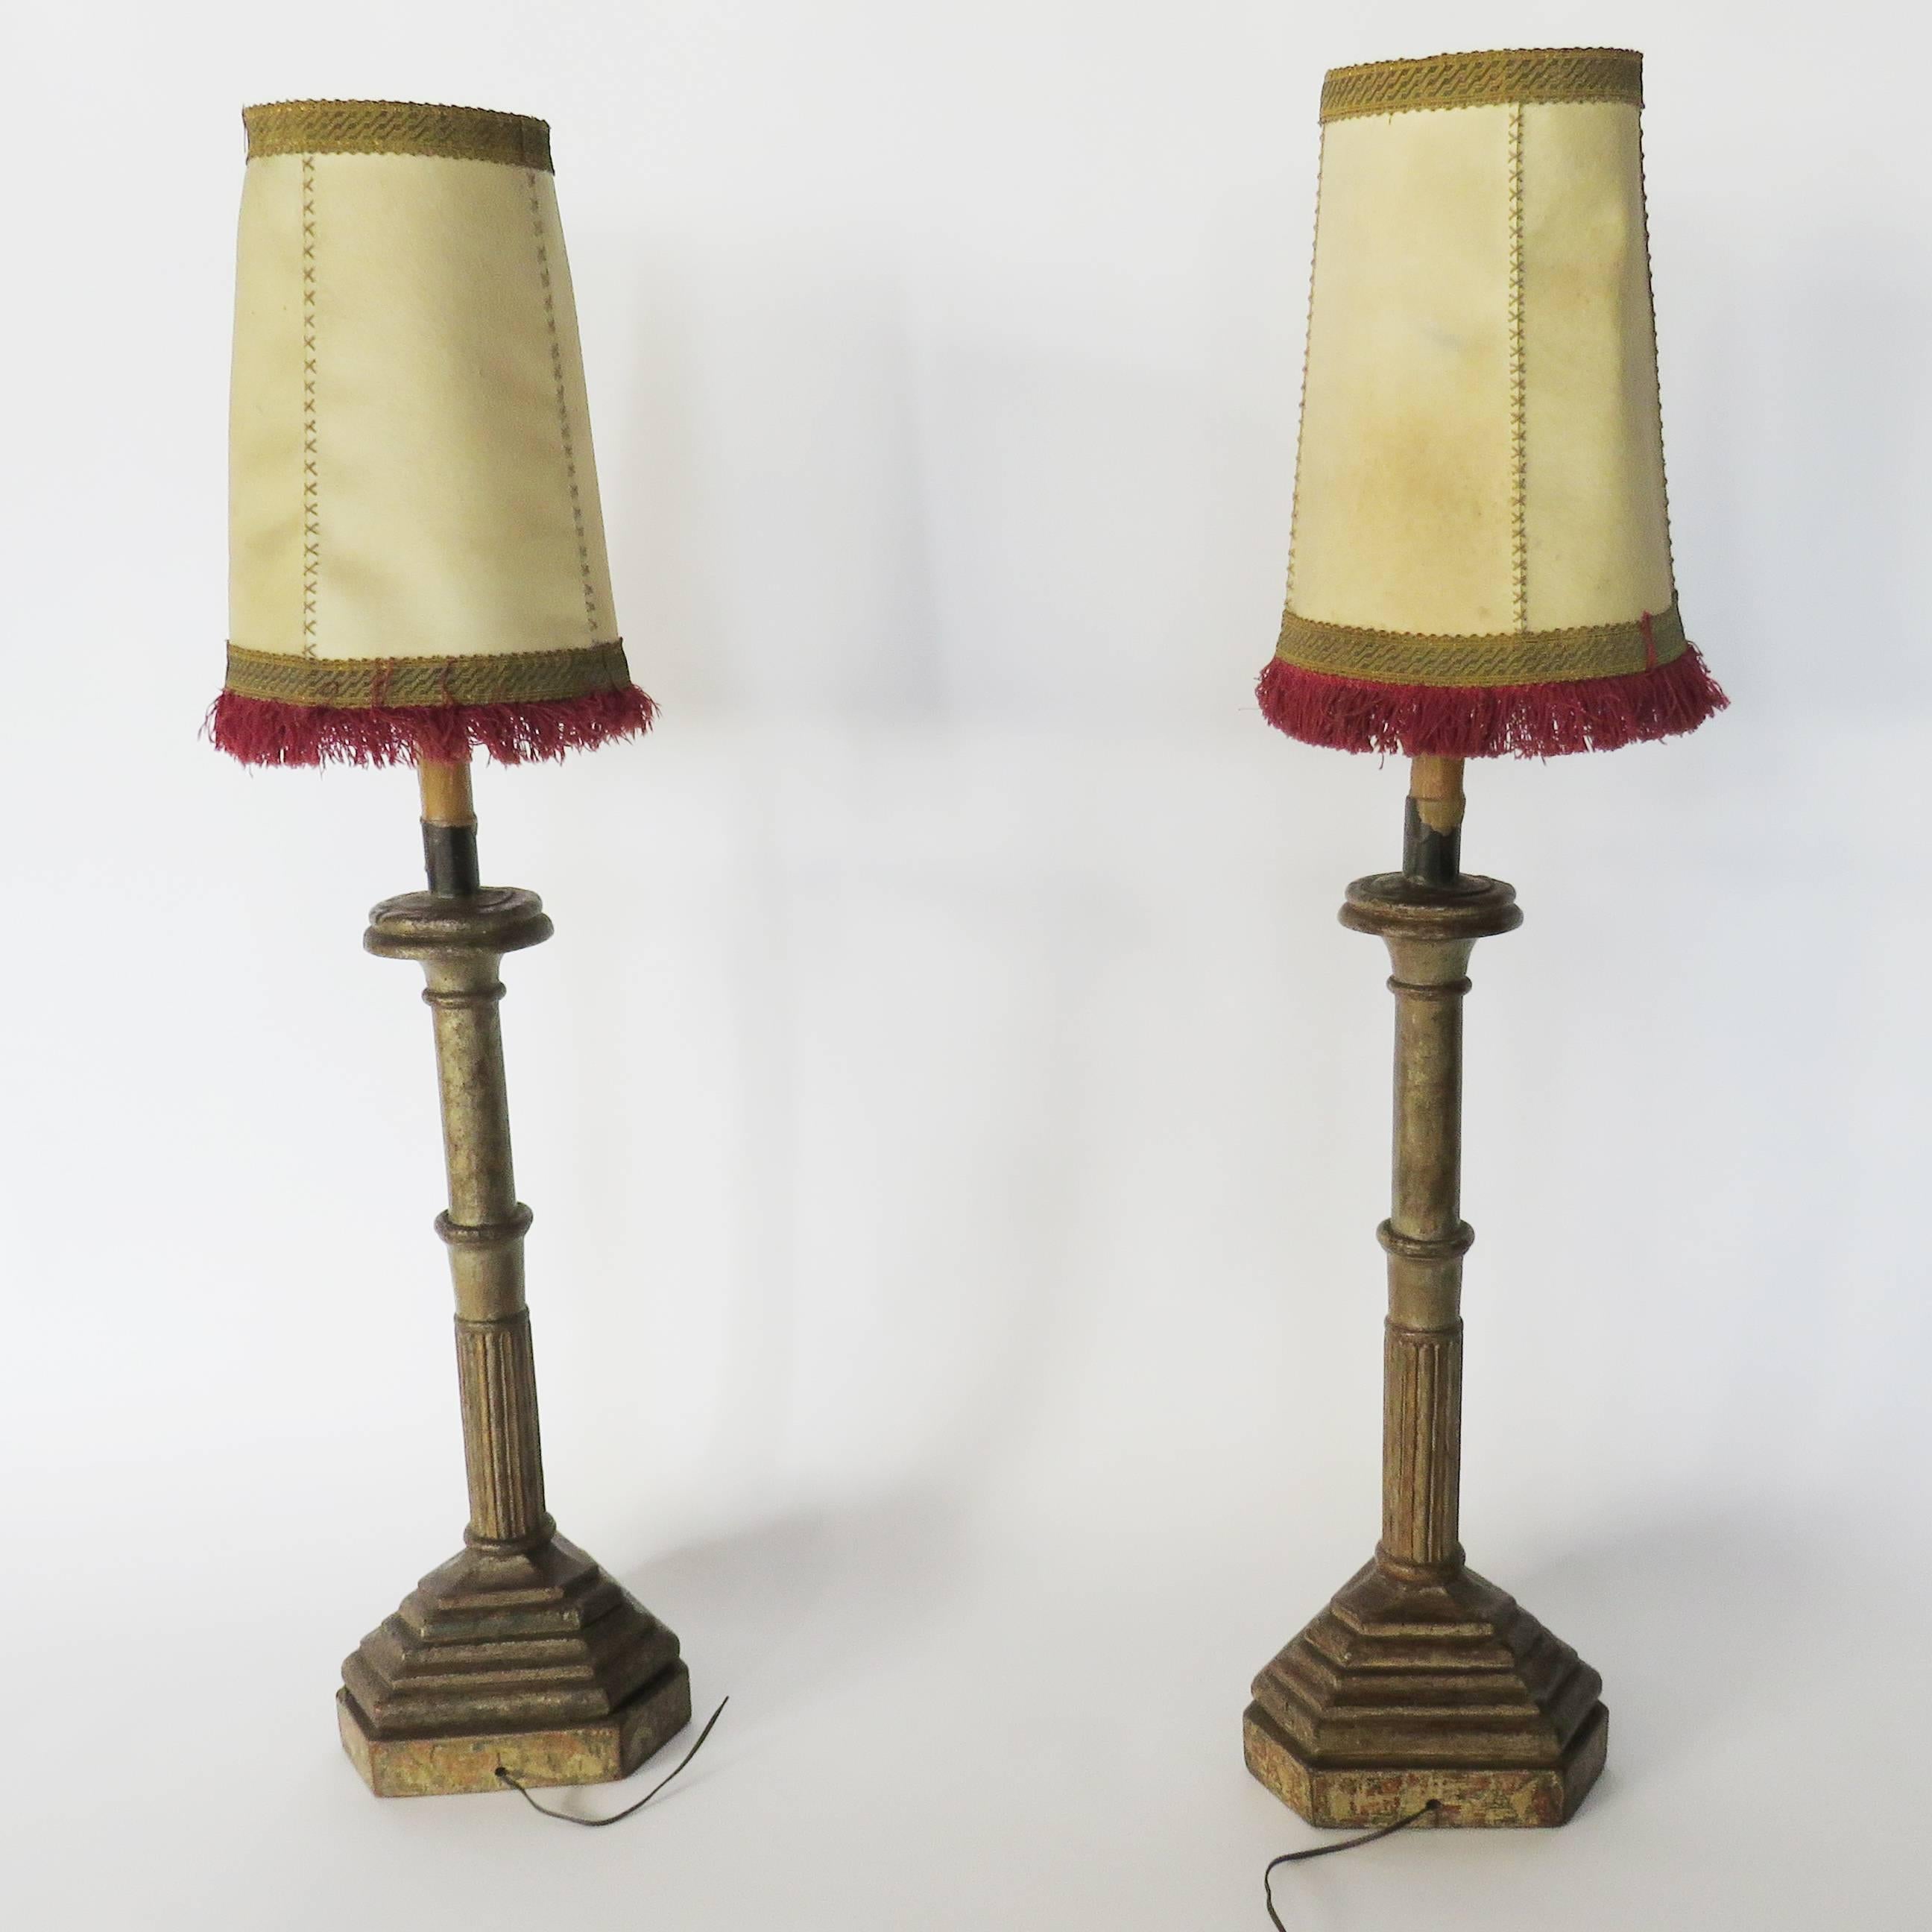 Baroque 18th Century Pair of Polychrome Candlesticks Table Lamps with Pigskin Shades For Sale